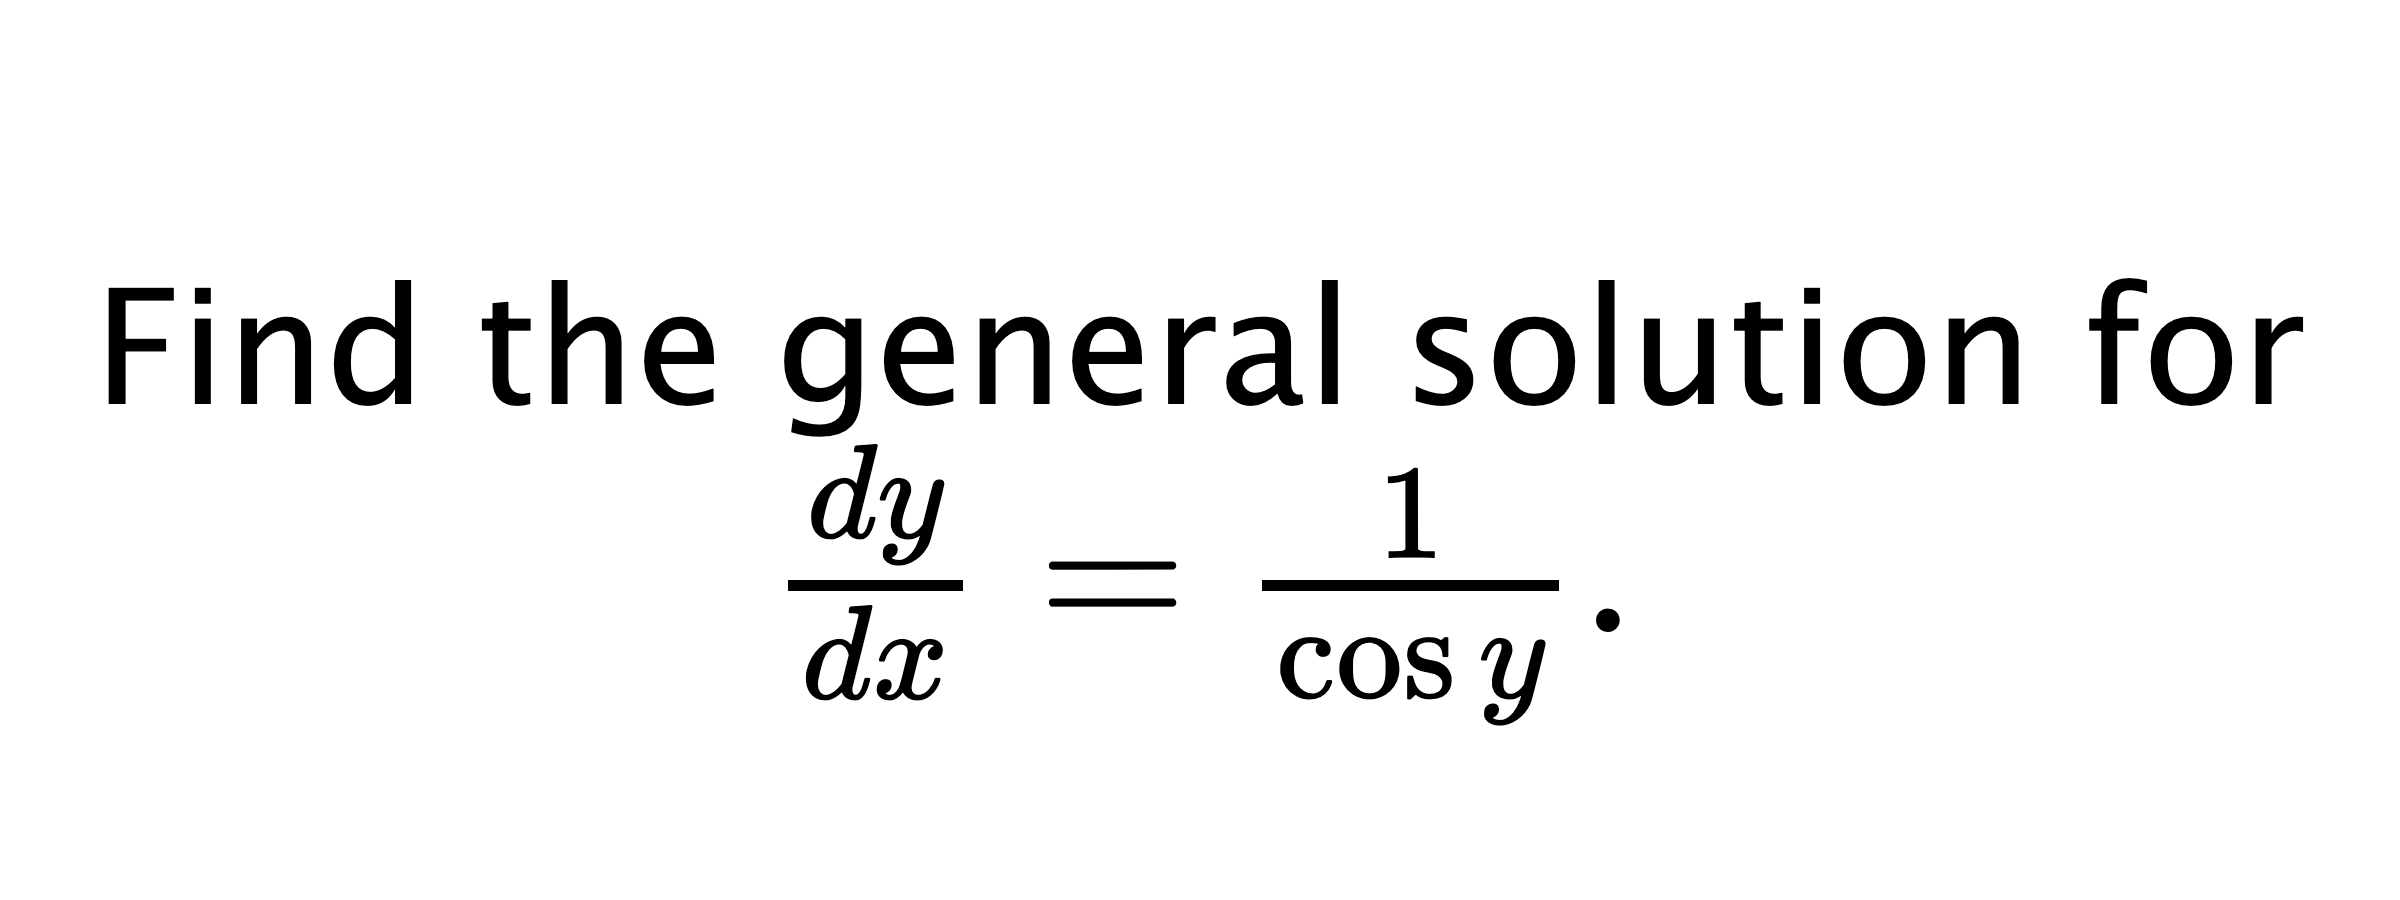  Find the general solution for $ \frac{dy}{dx}=\frac{1}{\cos{y}}. $